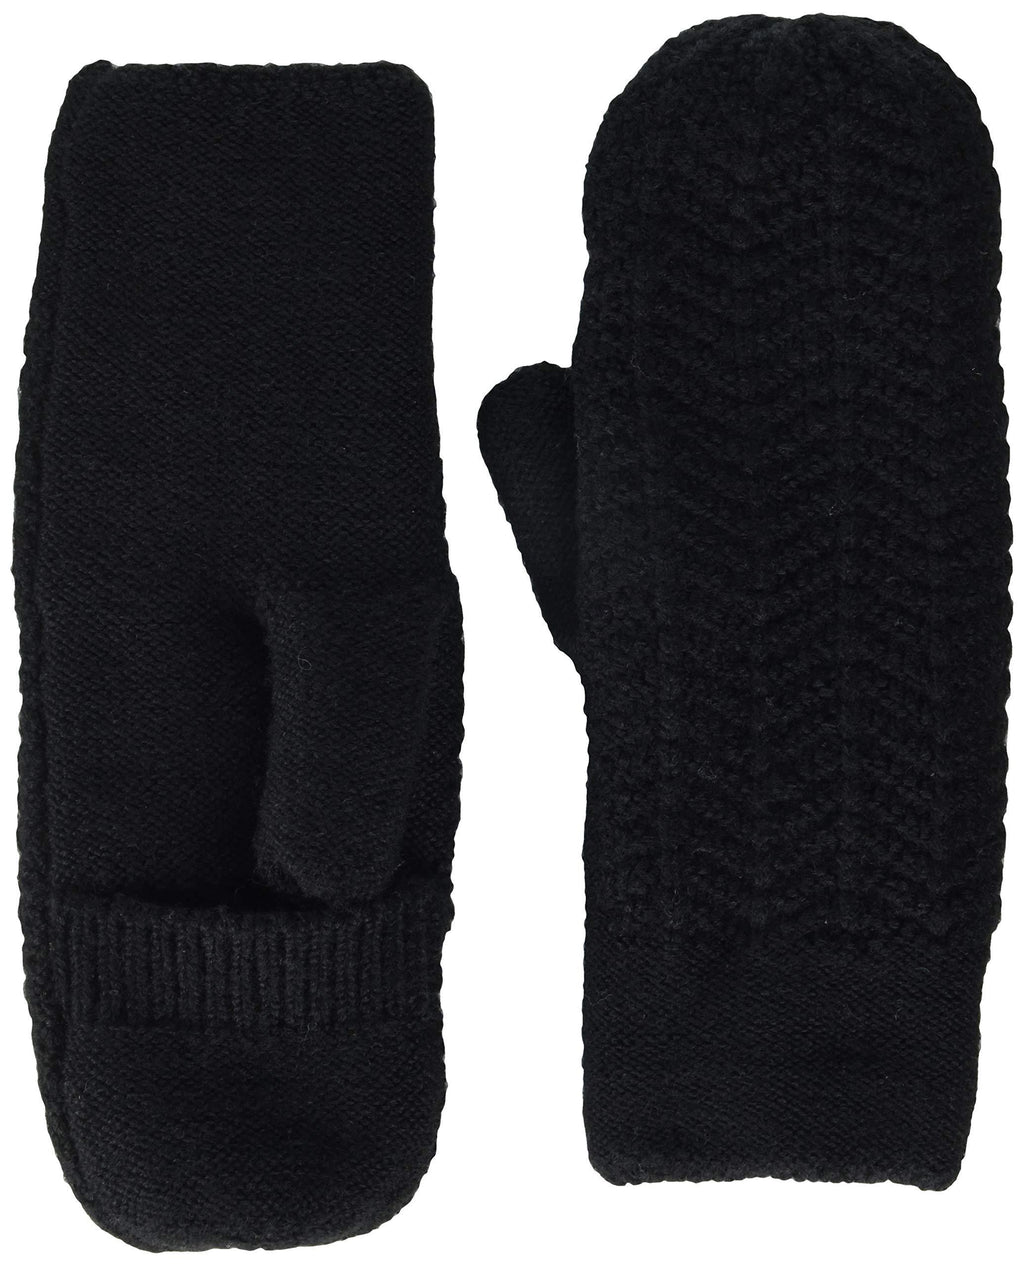 [Australia] - VIA By SKL Style Women's Recycled Knit Mittens One Size Black 